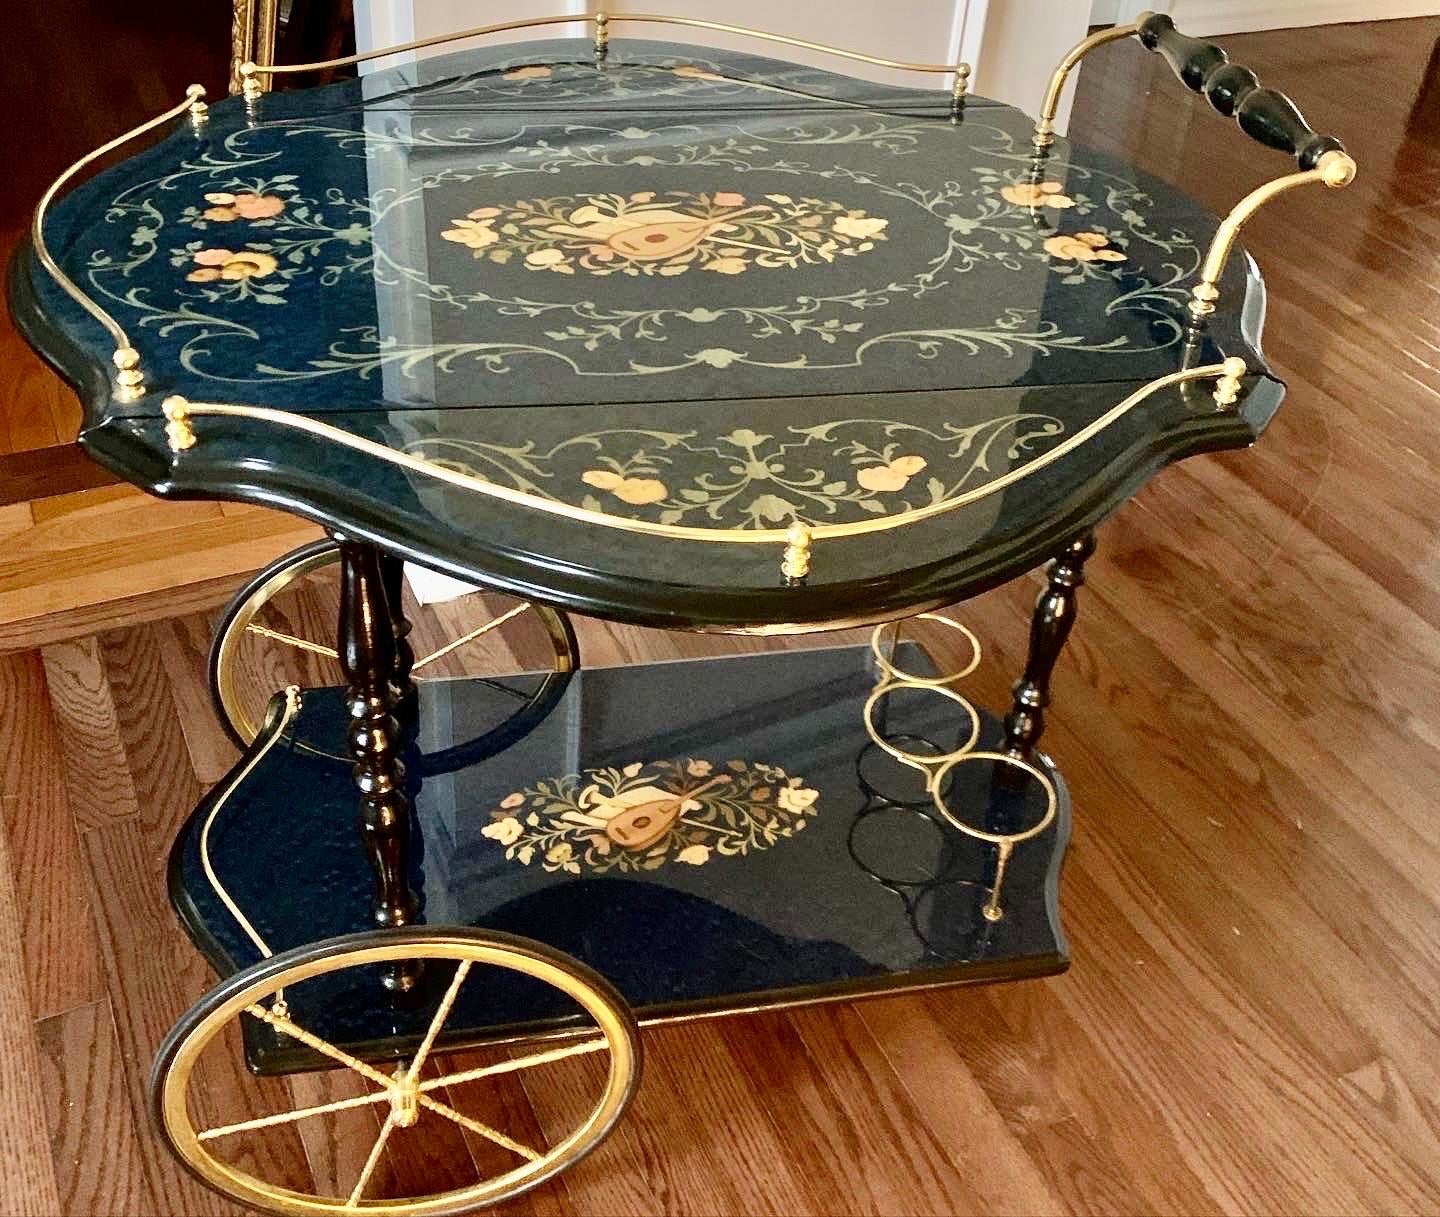 Beautiful Italian inlaid marquetry bar cart with brass accent and drop leaves. Two large carriage style front wheels and one small swivel caster rear one. All wheels operate smoothly. Lovely, vibrant detail throughout with hand painted guitar and